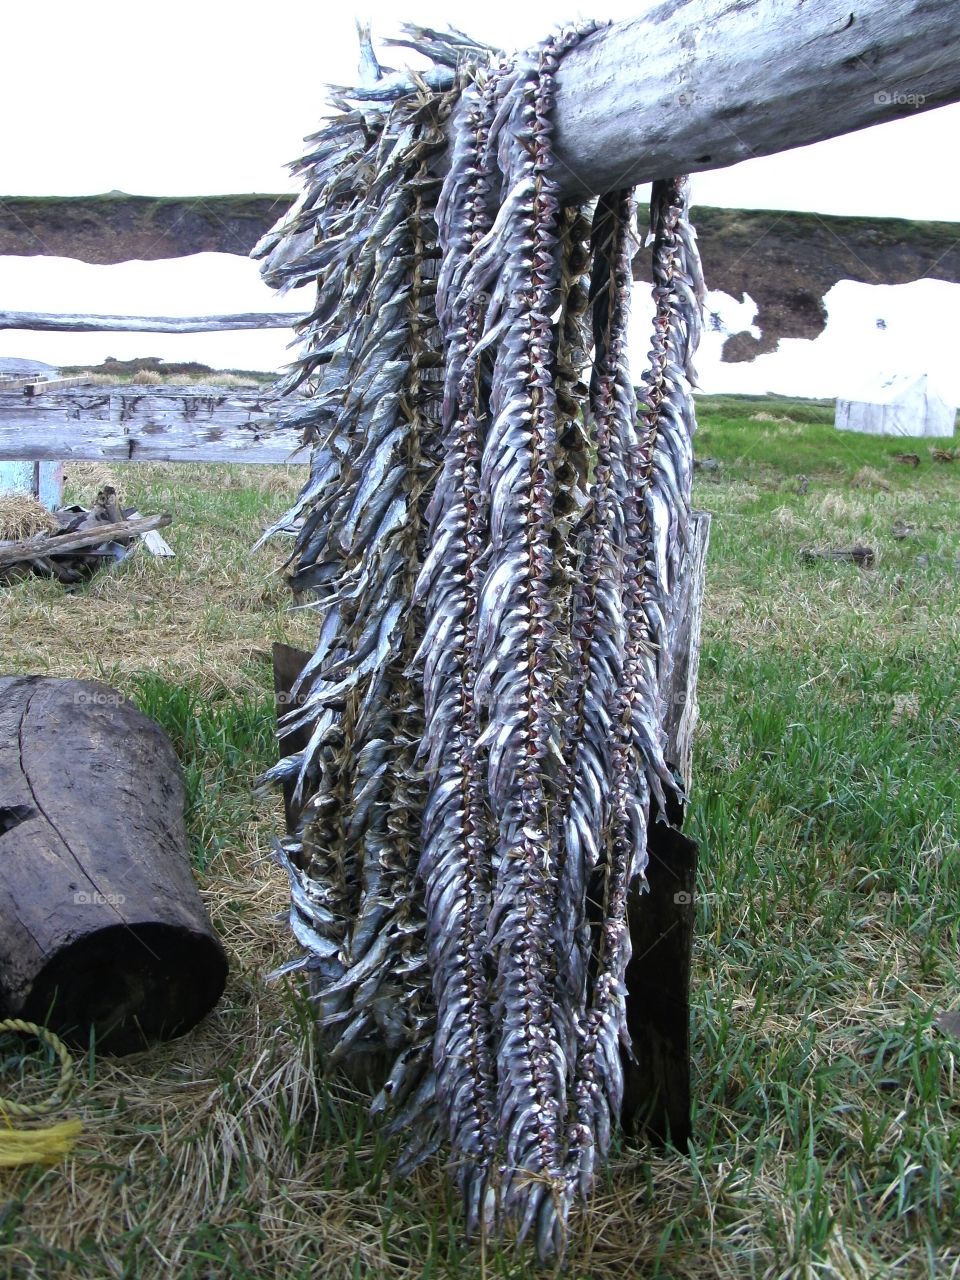 fish braided with grass to dry